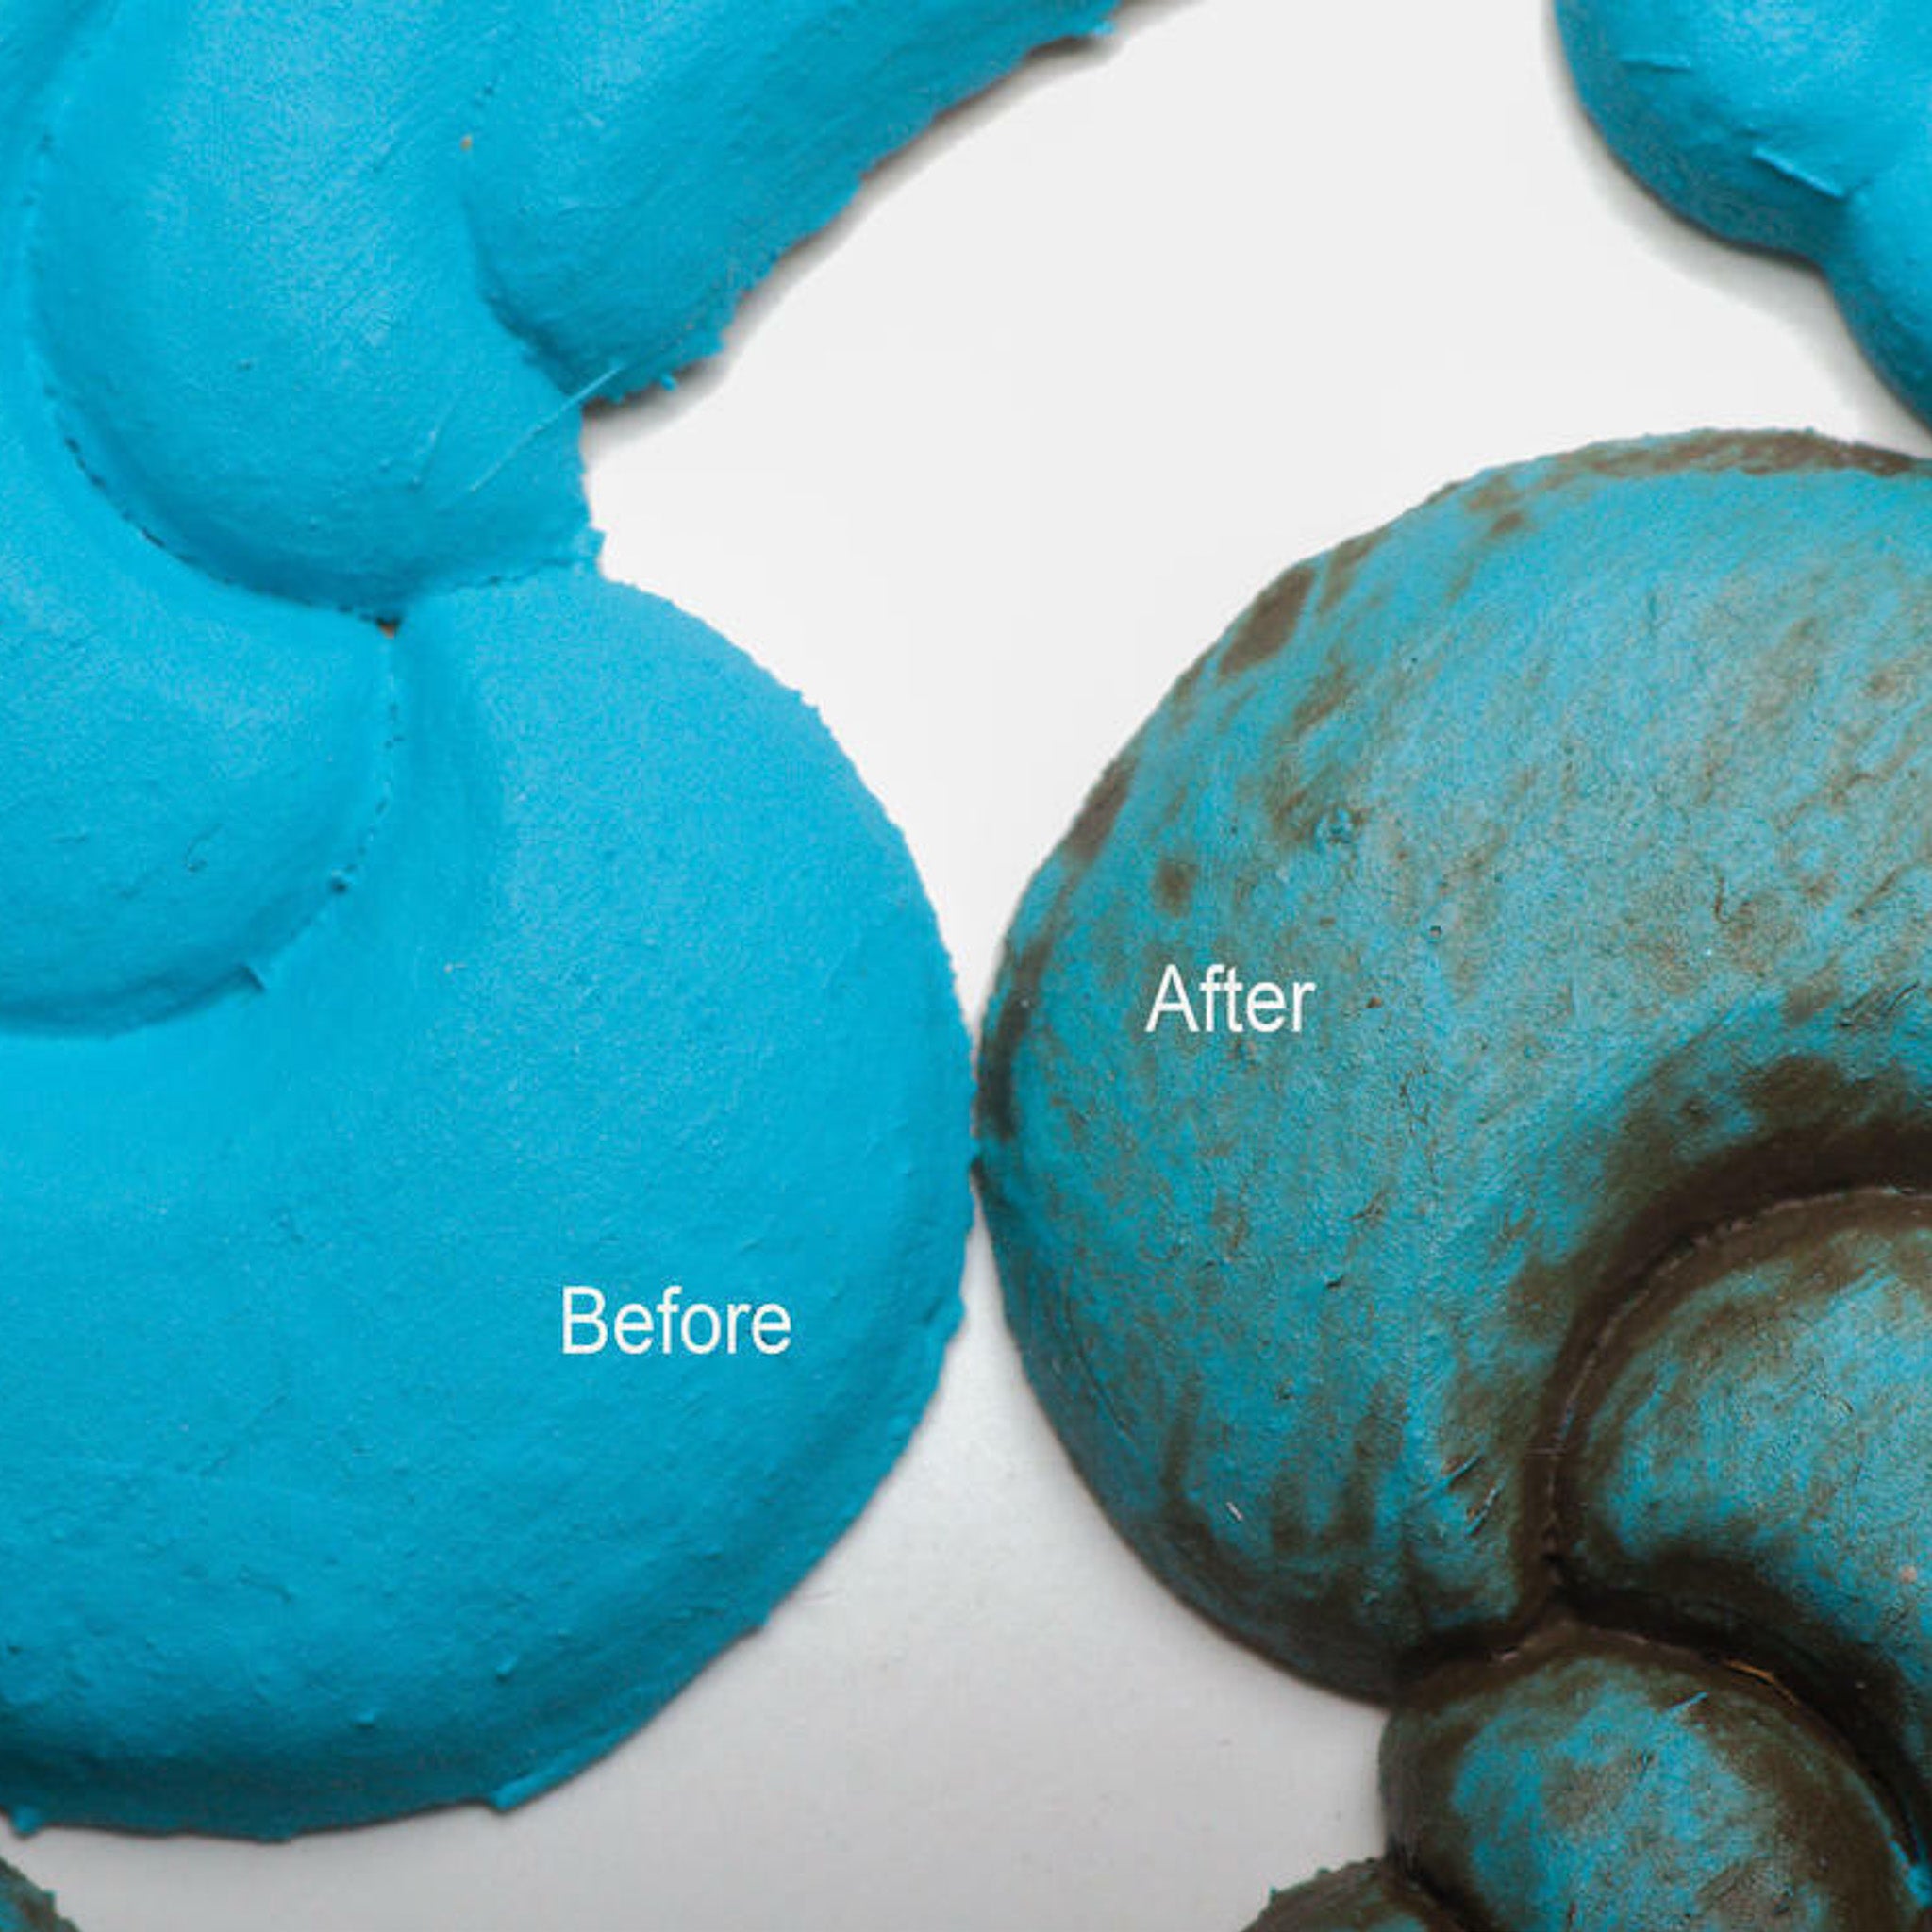 Close-up view of a turquoise colored silicone mould casting that shows the before and after use of Dixie Belle's Van Dyke Glaze.